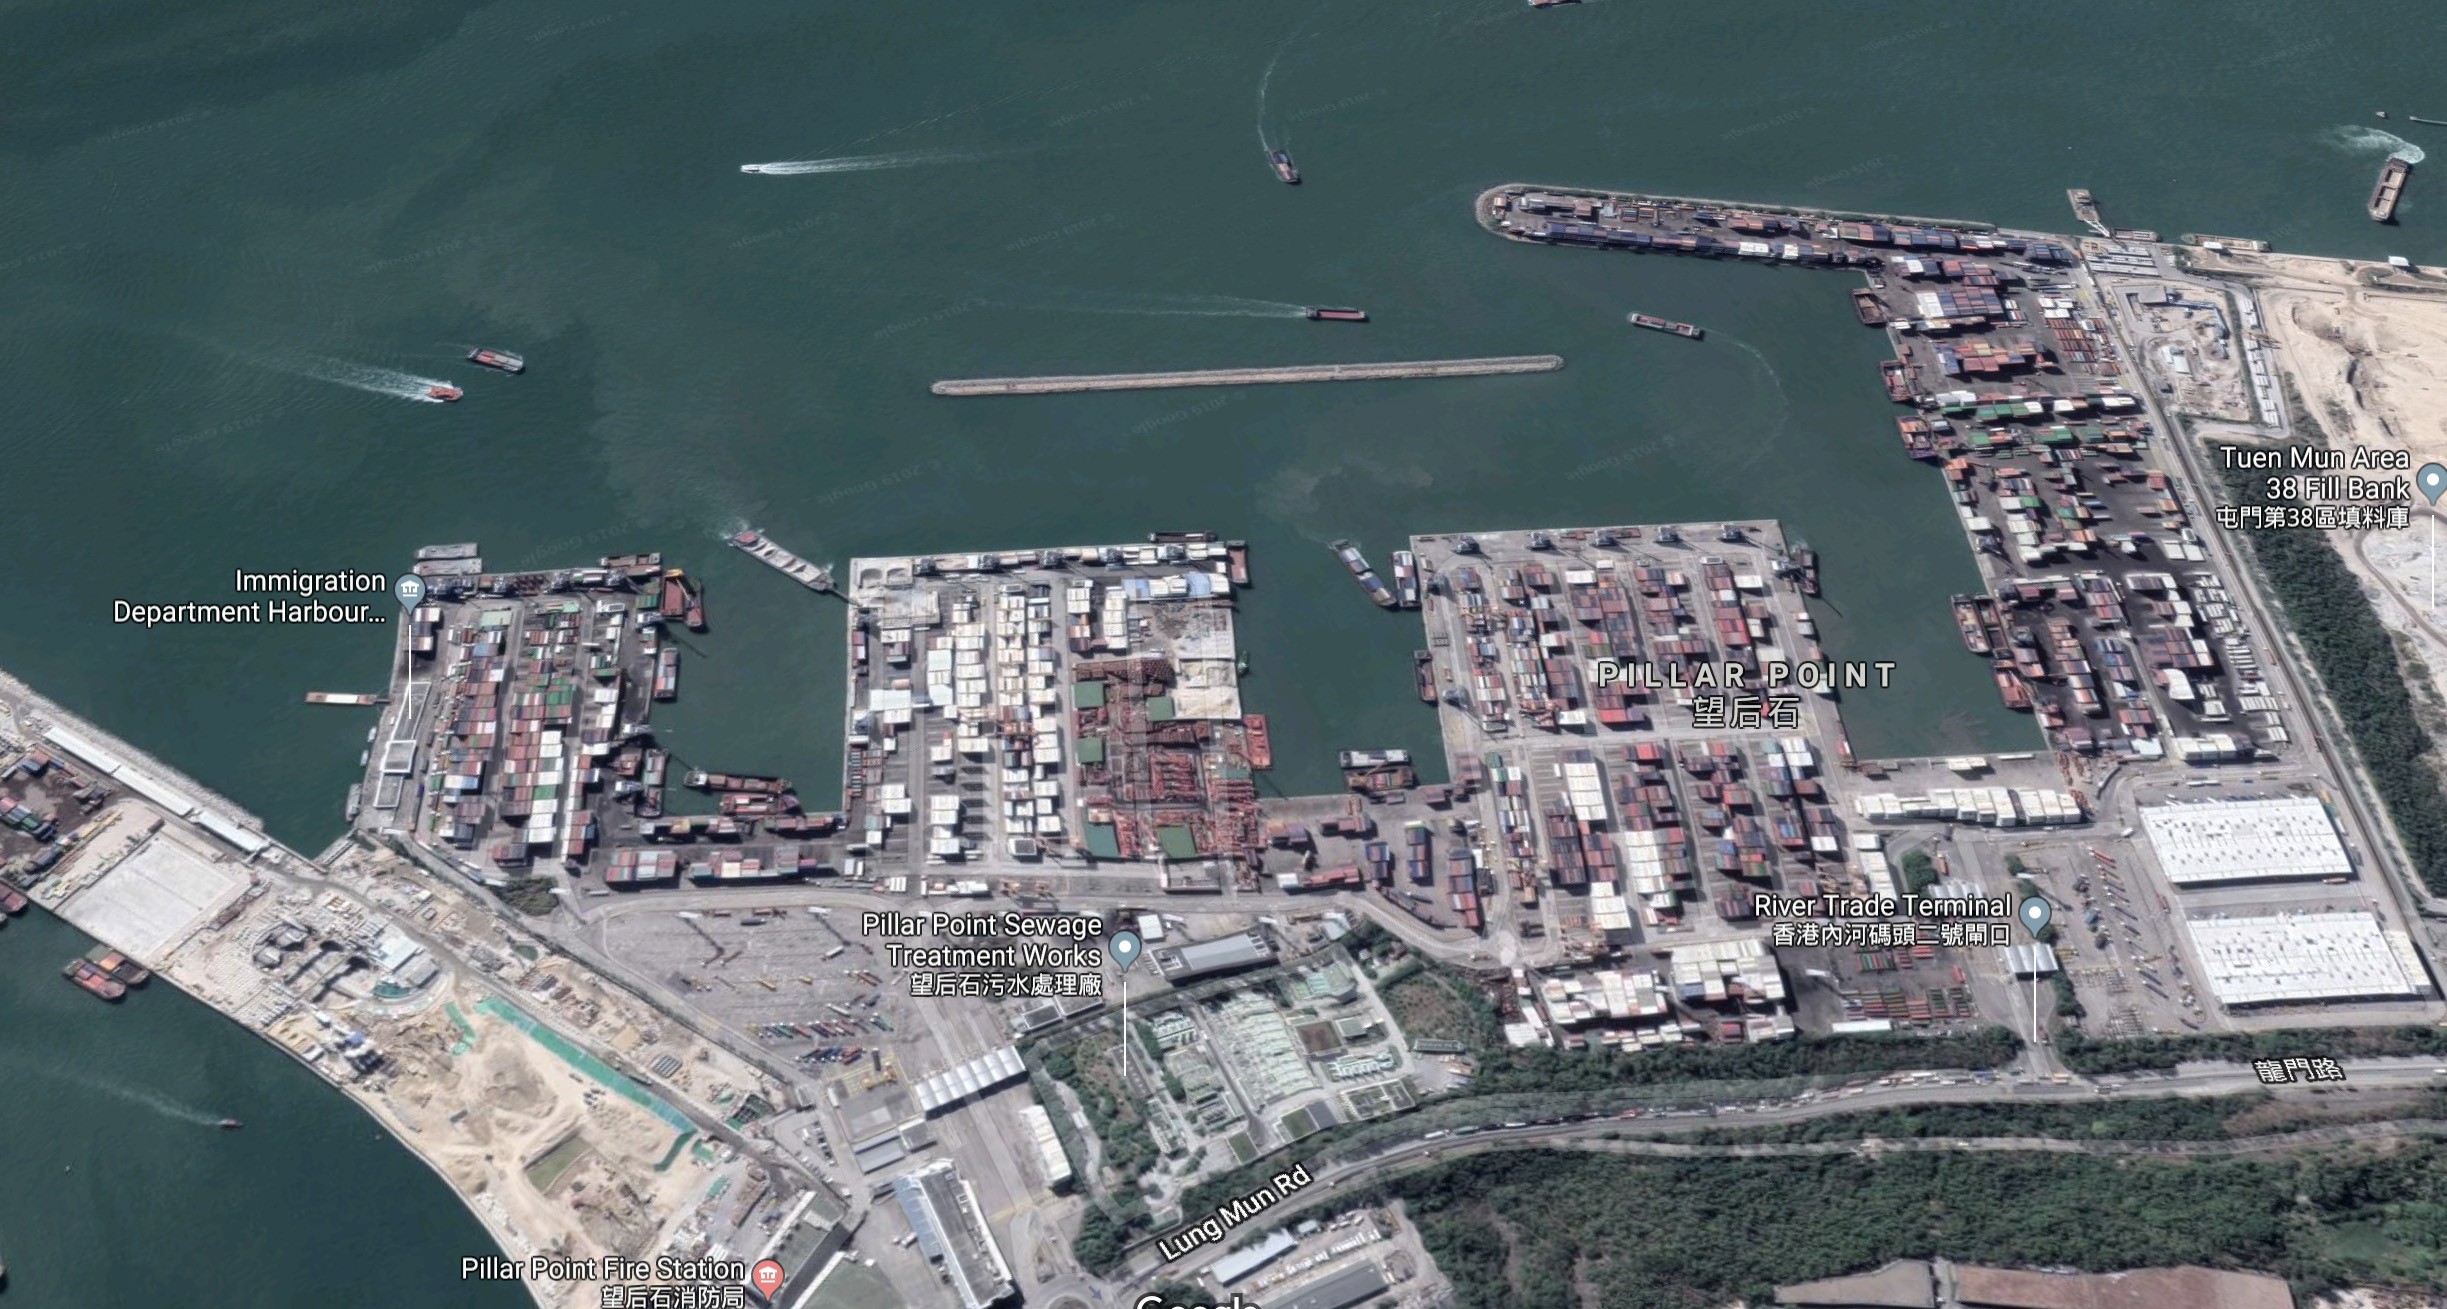 The River Trade terminal in Tuen Mun could be moved to Lung Kwu Tan to allow for the development of a new settlement, under plans being considered by the government. Photo: Google